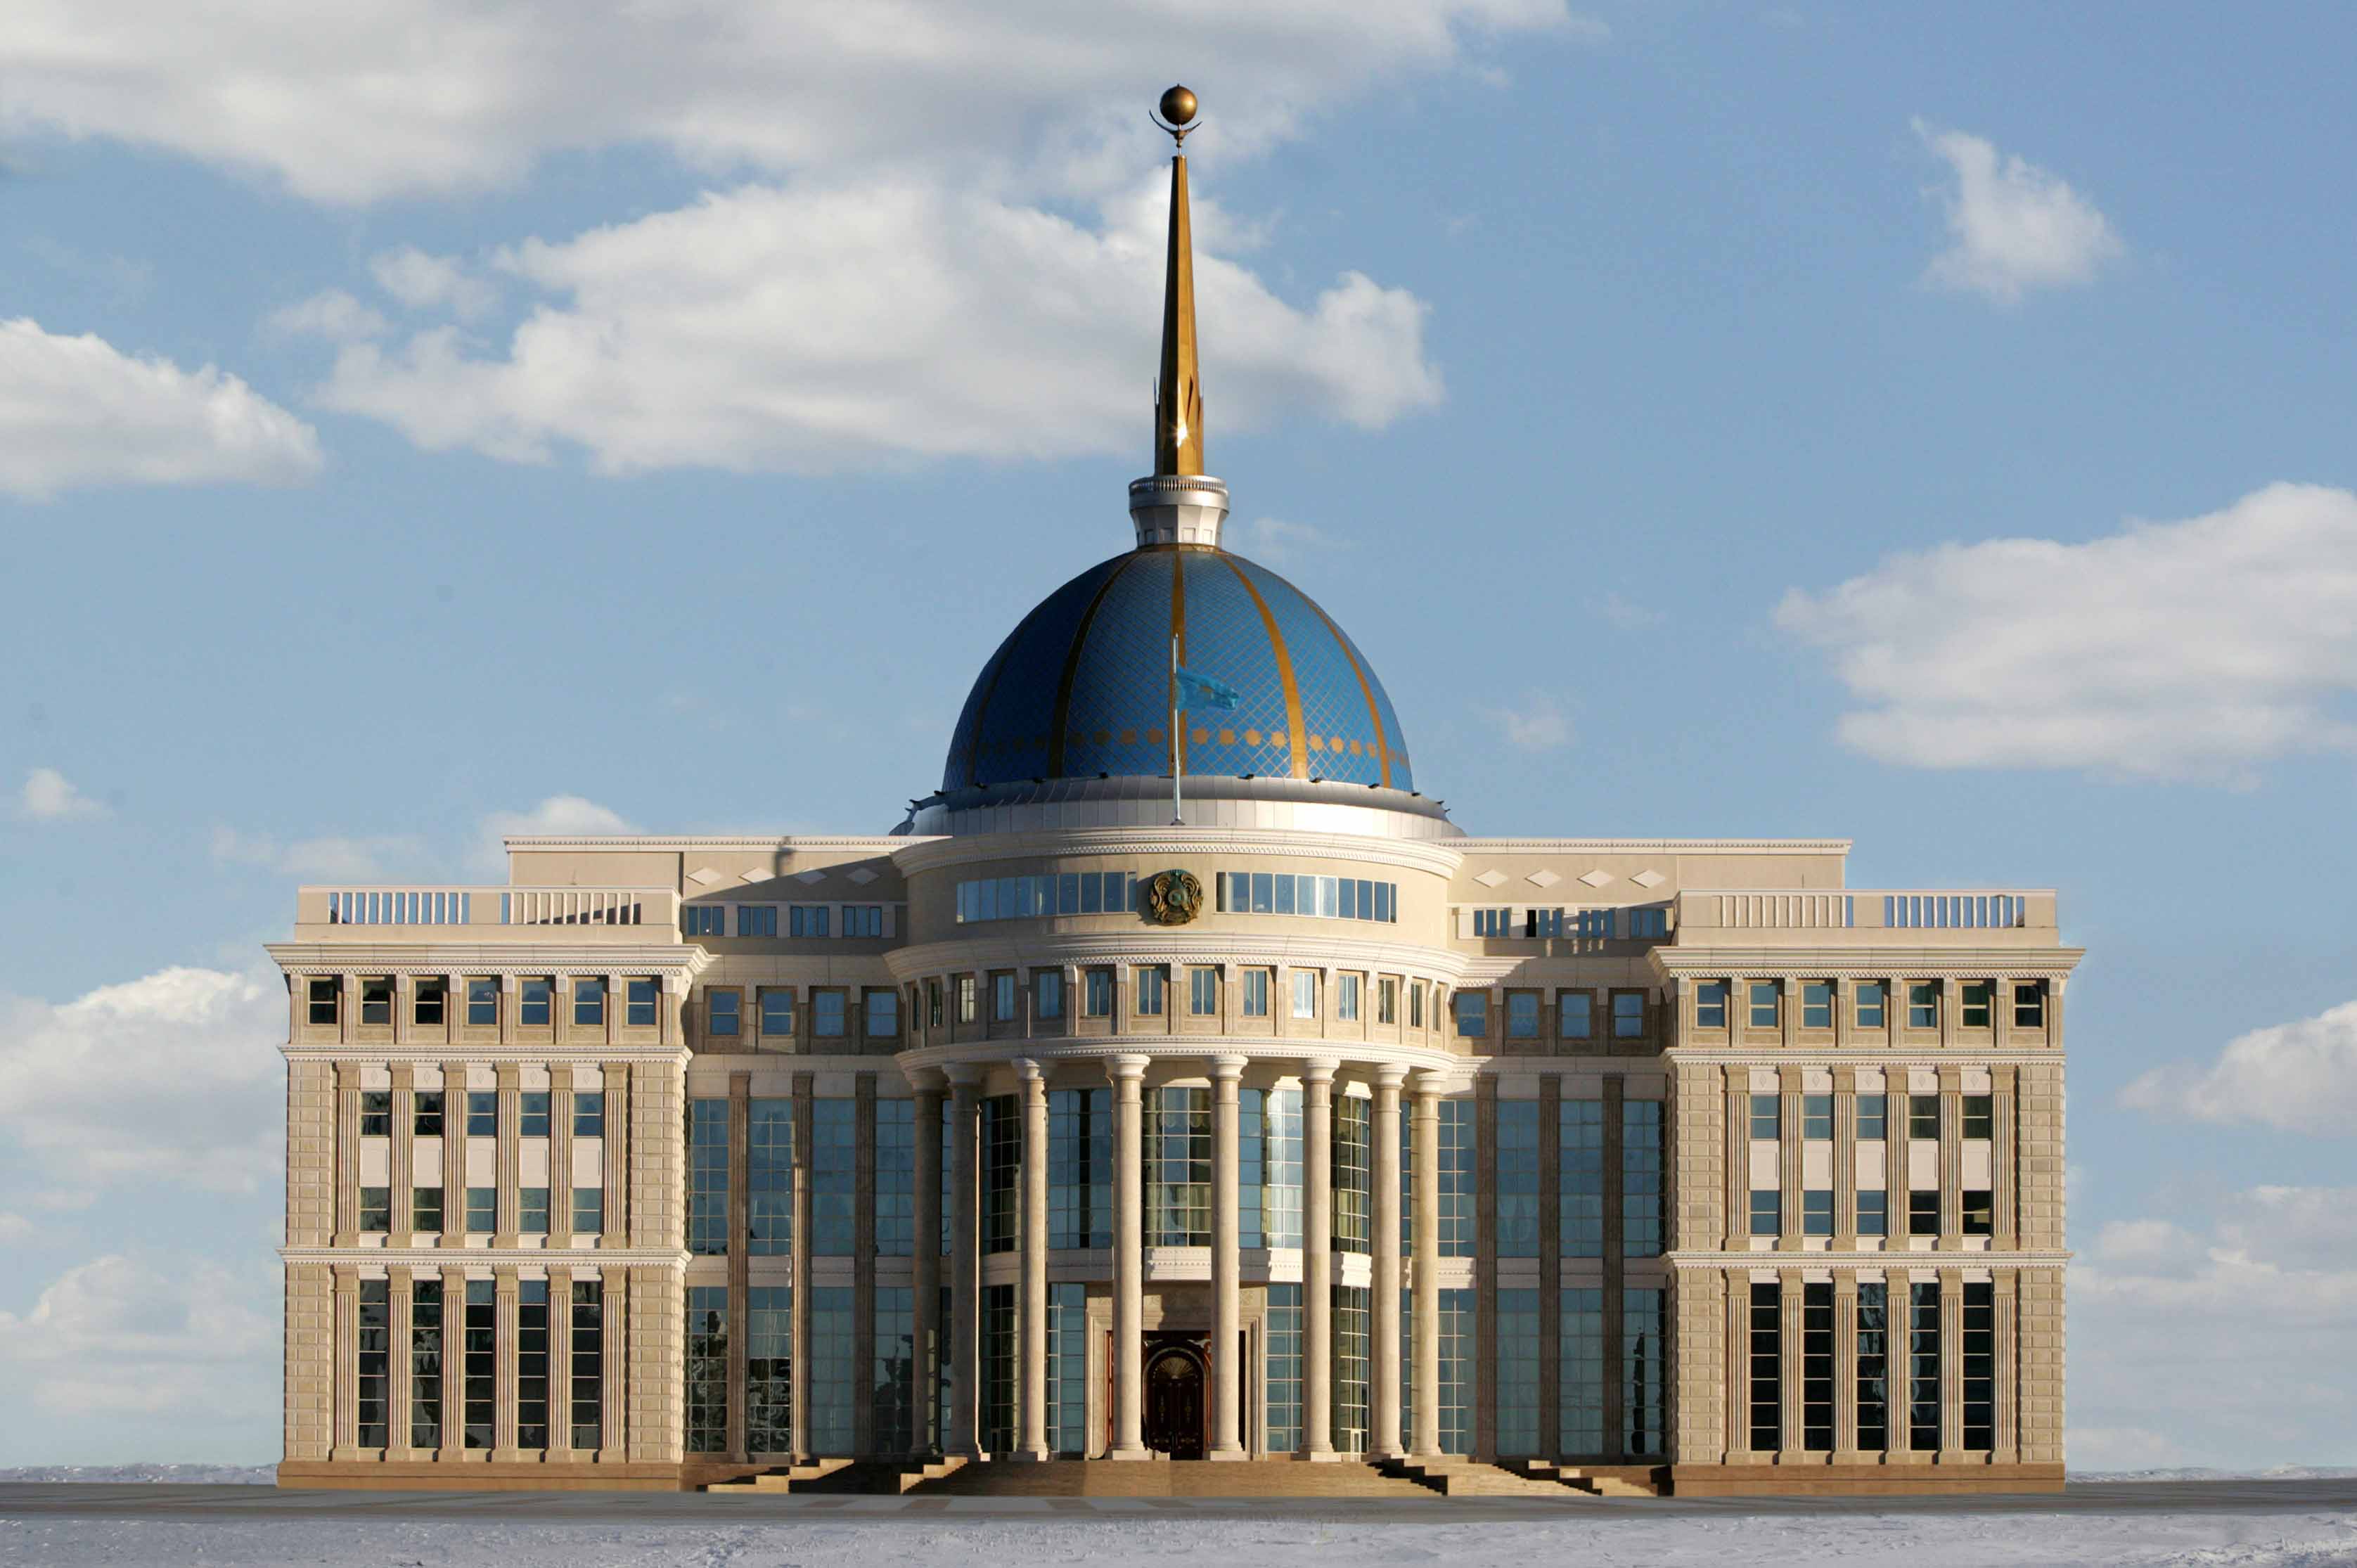 Commissioner for Children's Rights appointed in Kazakhstan